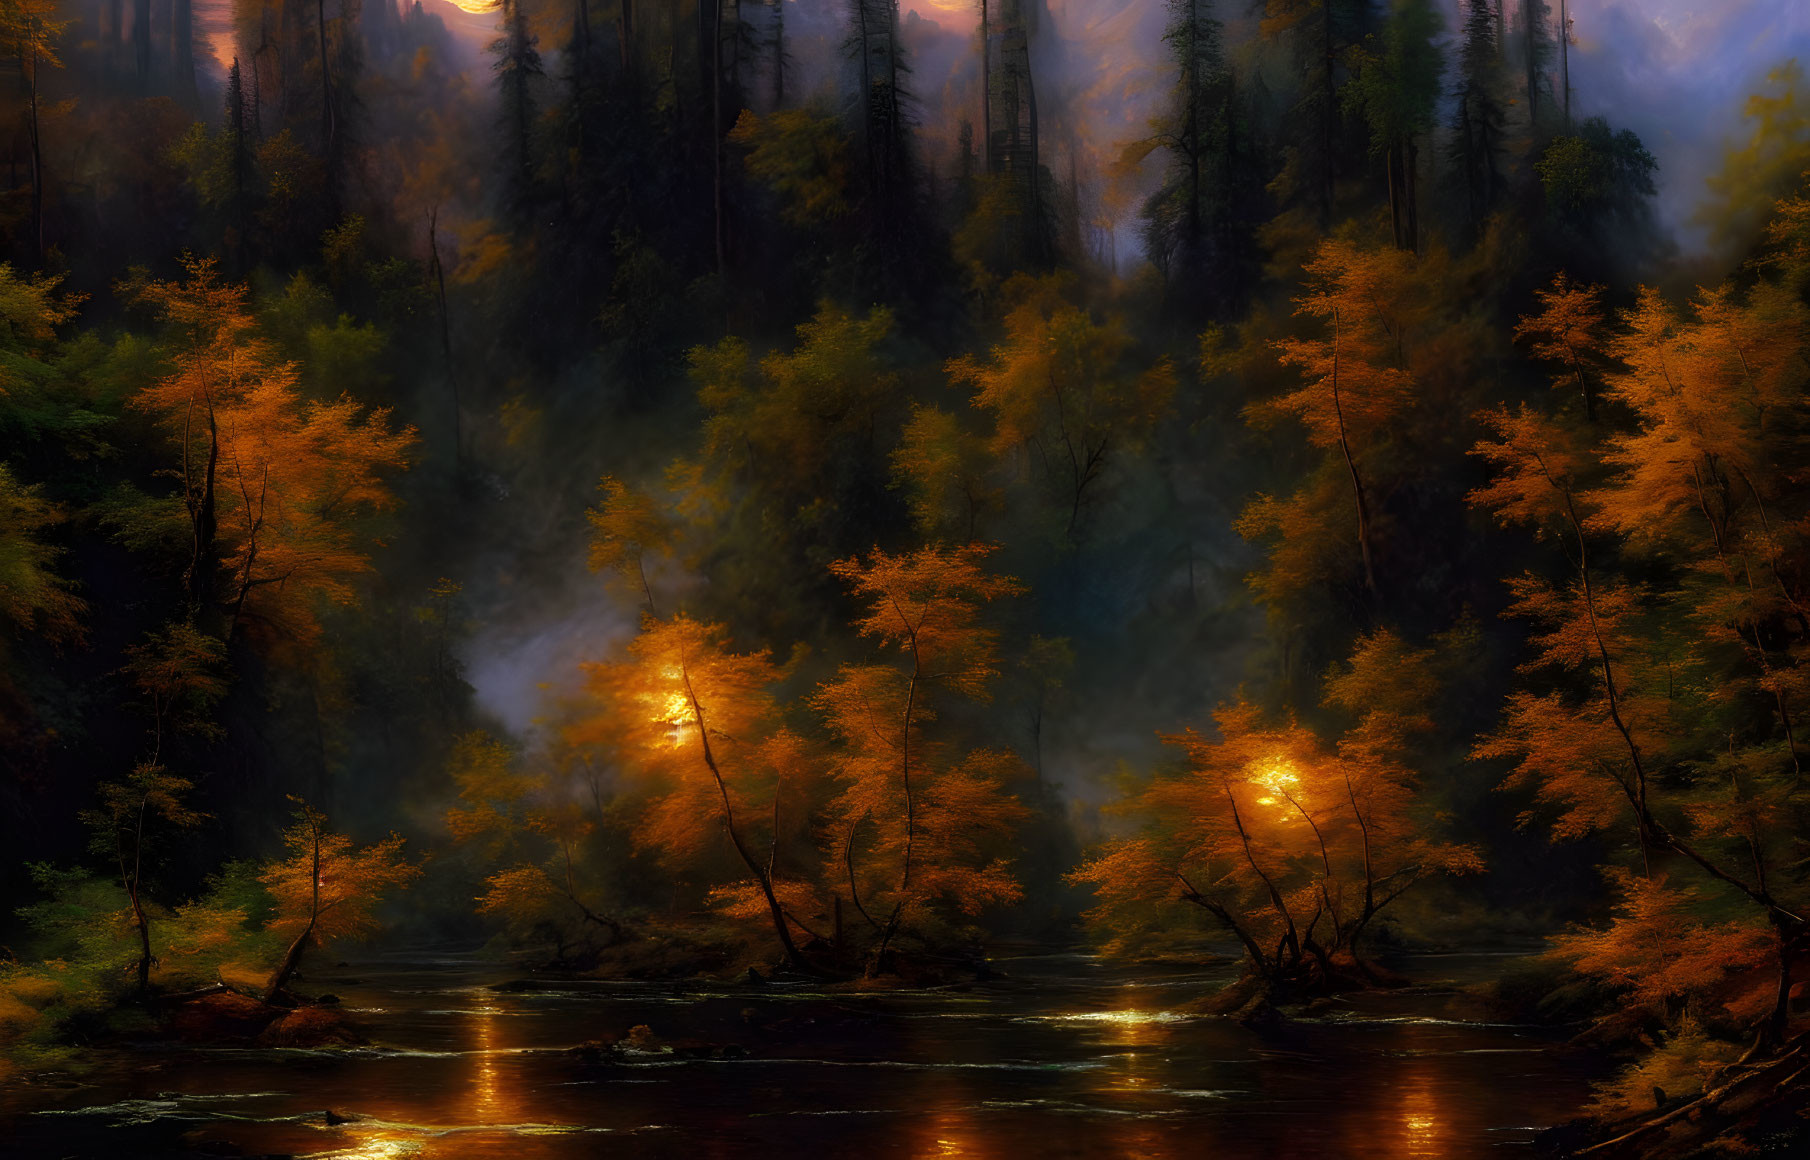 Tranquil autumn forest scene with misty river and golden leaves